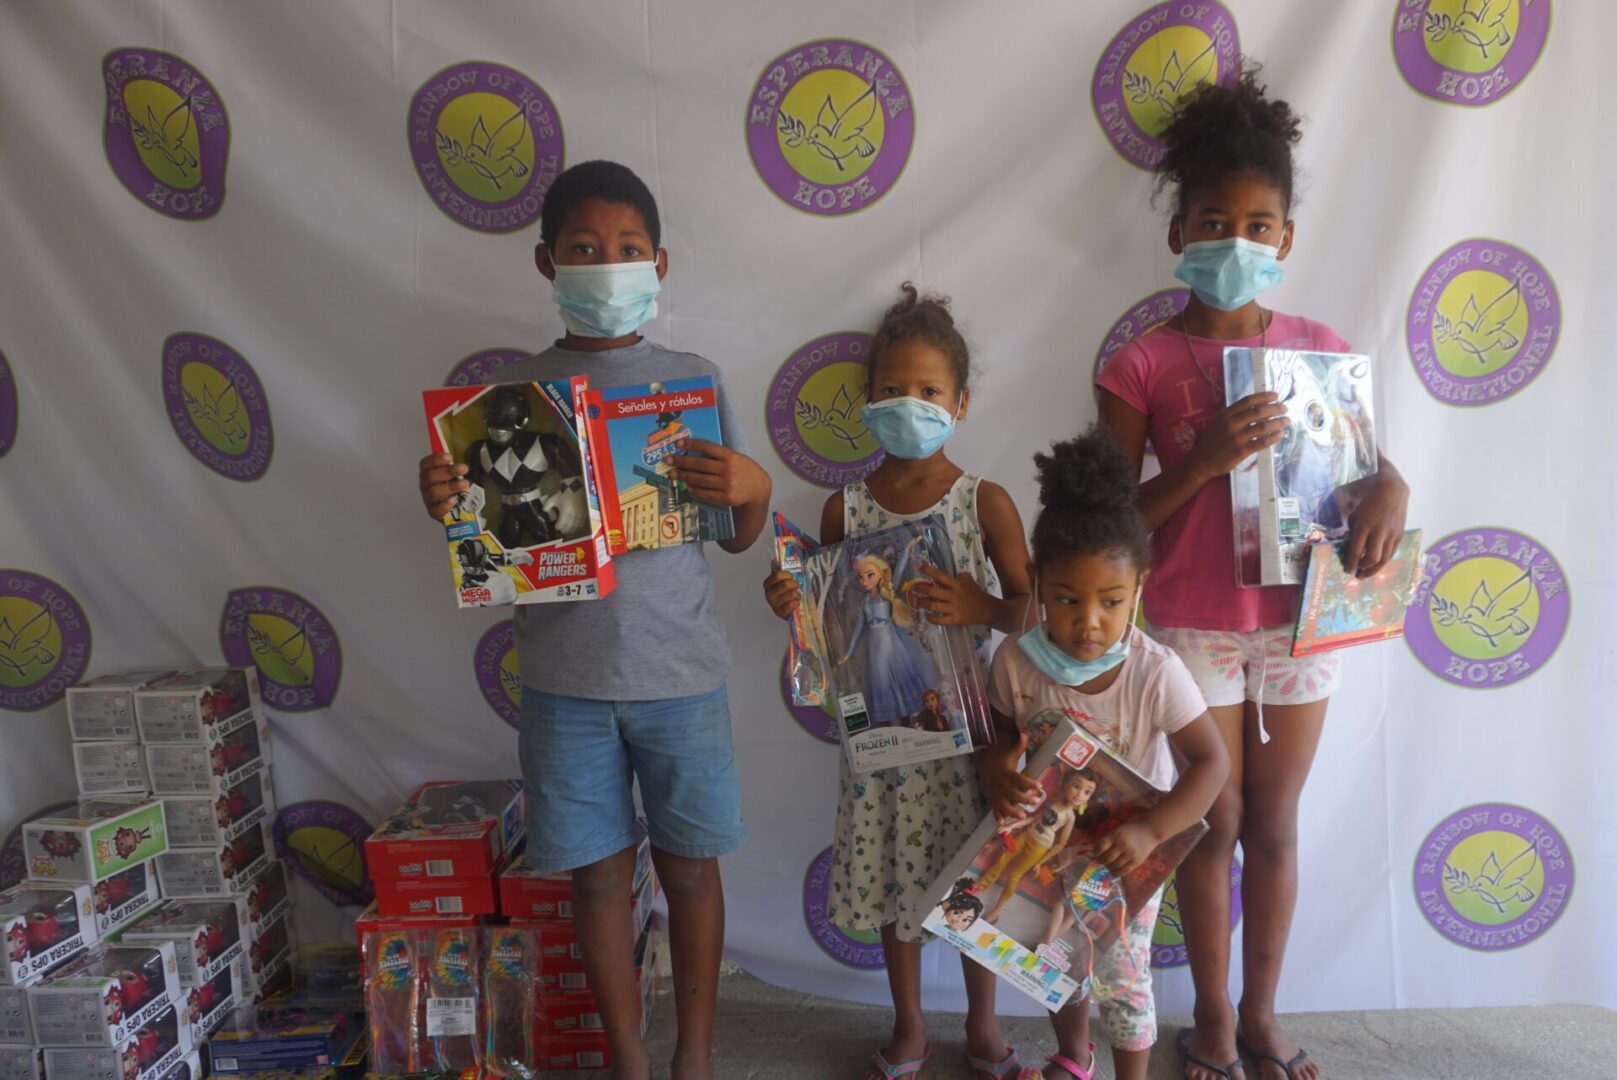 Four children standing against the Esperanza-Hope backdrop with their toys and books, batch 4